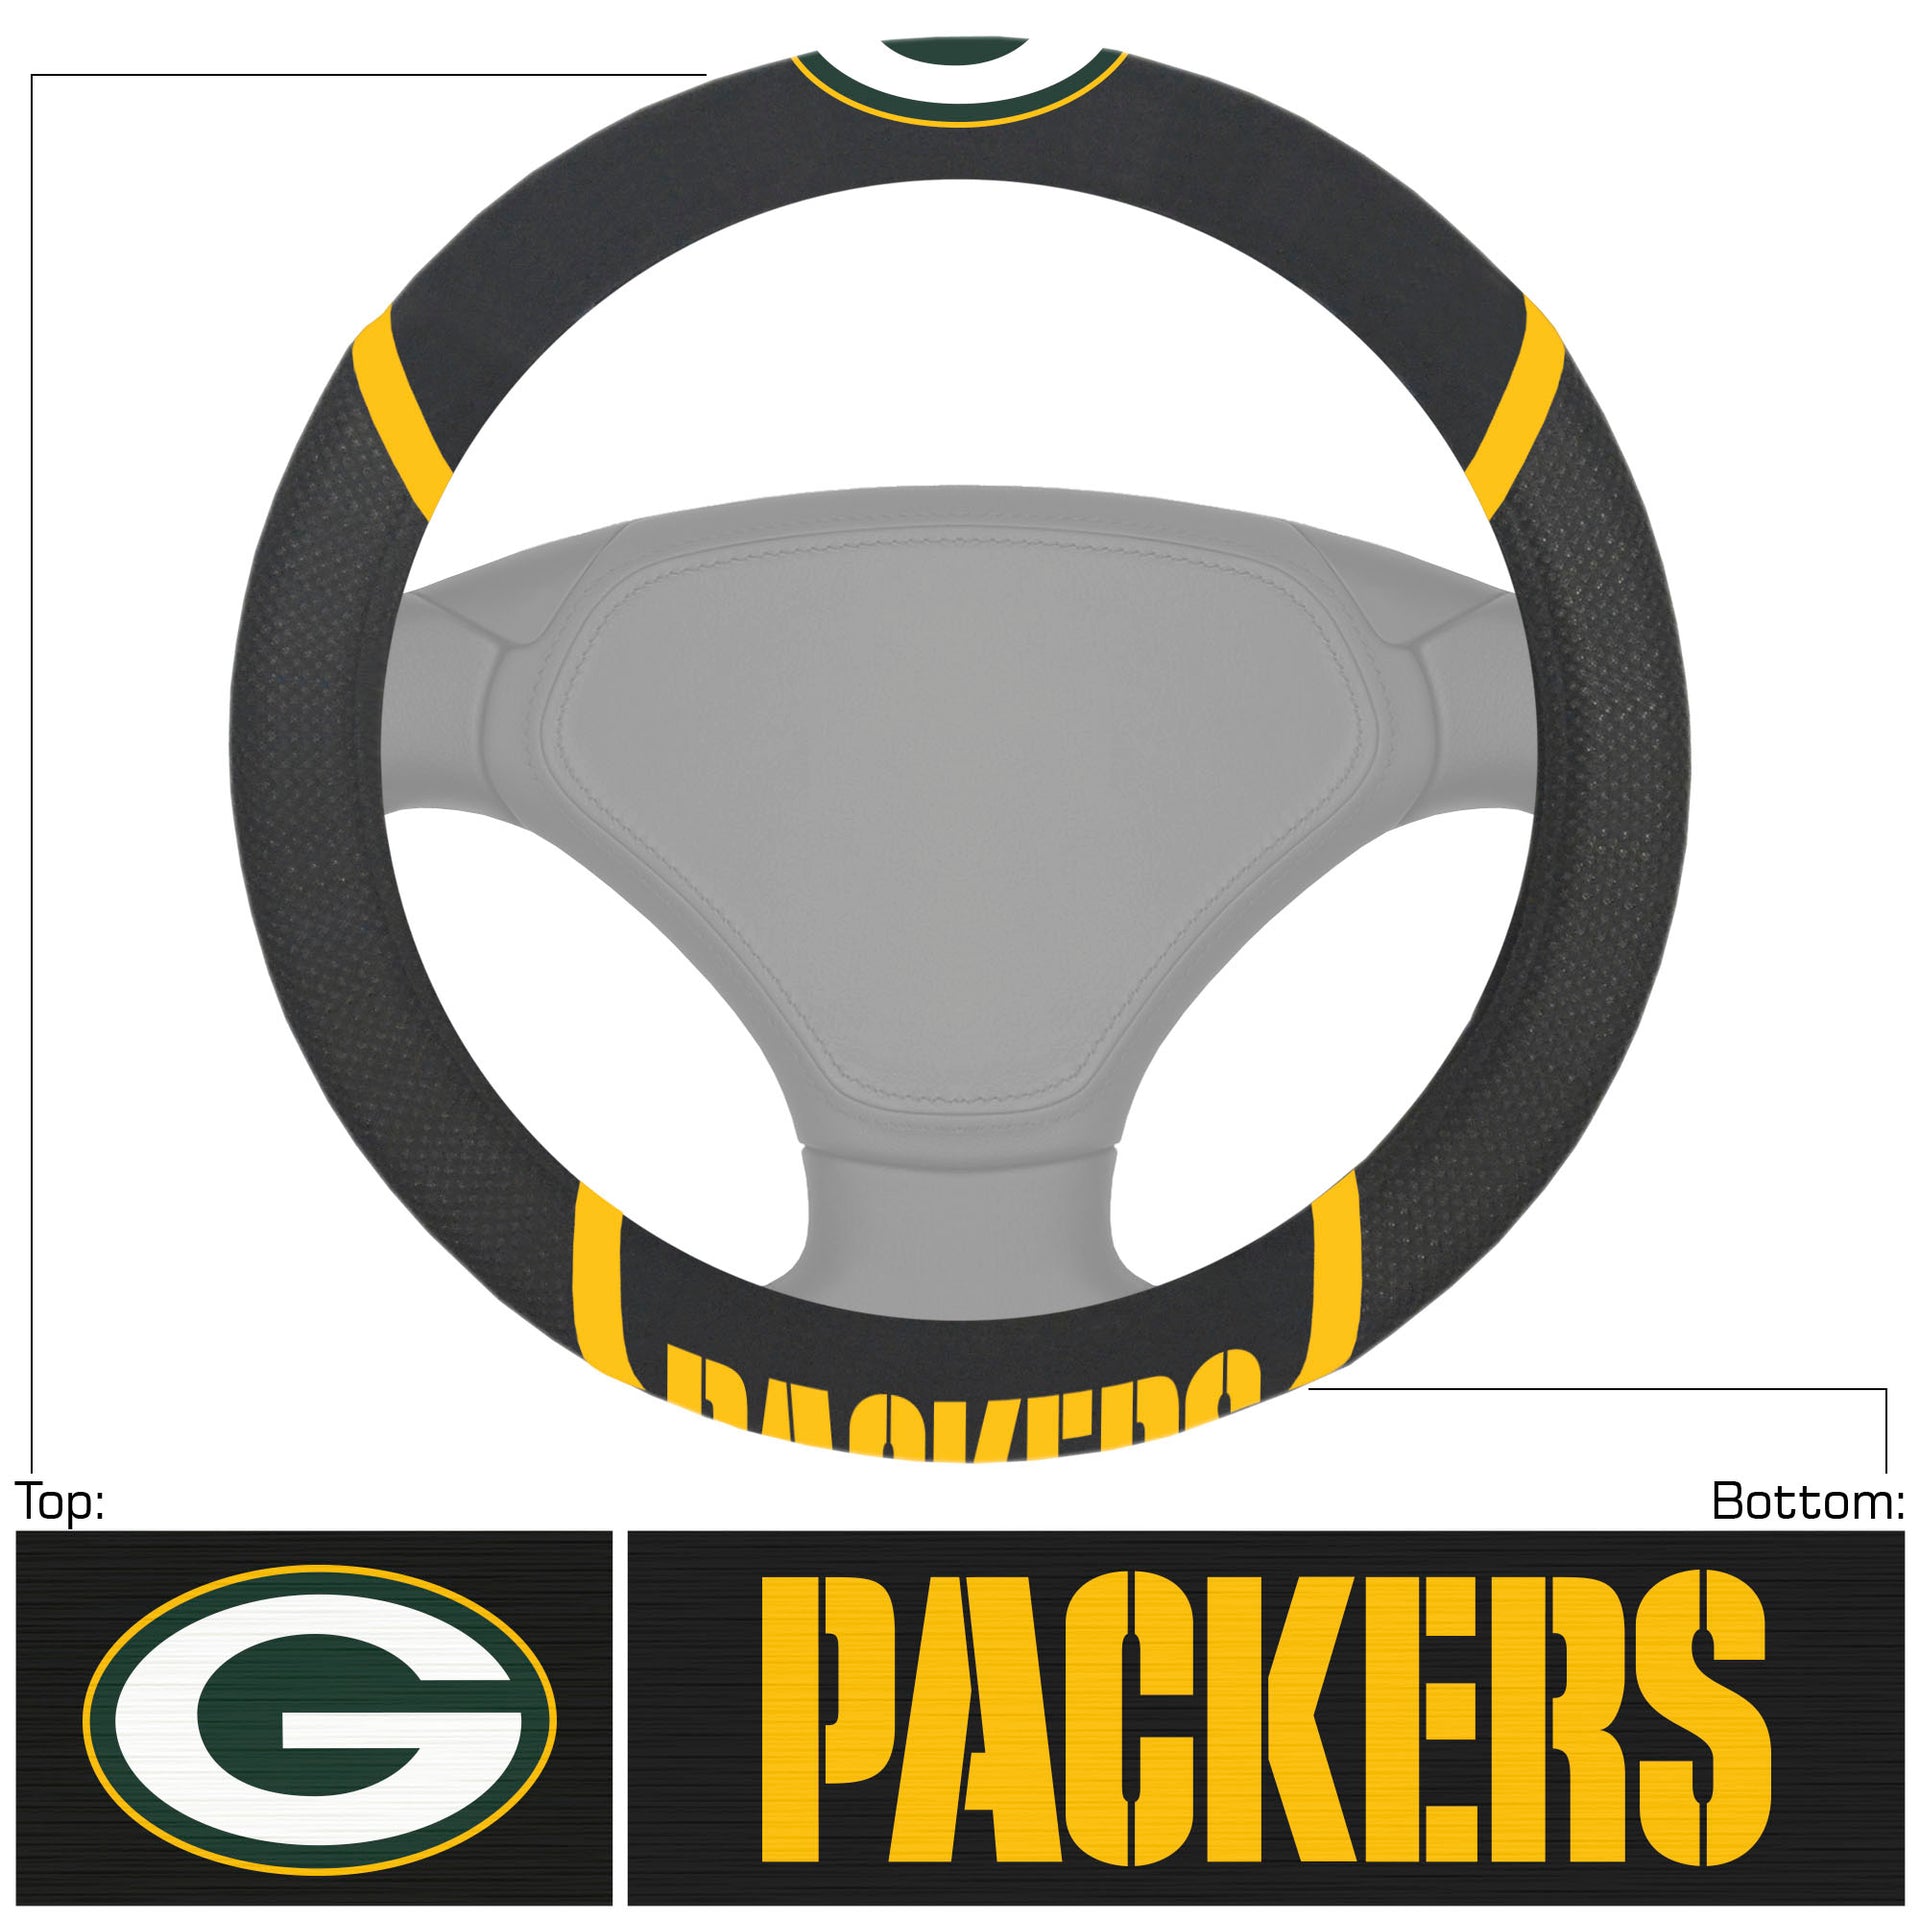 Green Bay Packers Deluxe Football Steering Wheel Cover - Dynasty Sports & Framing 